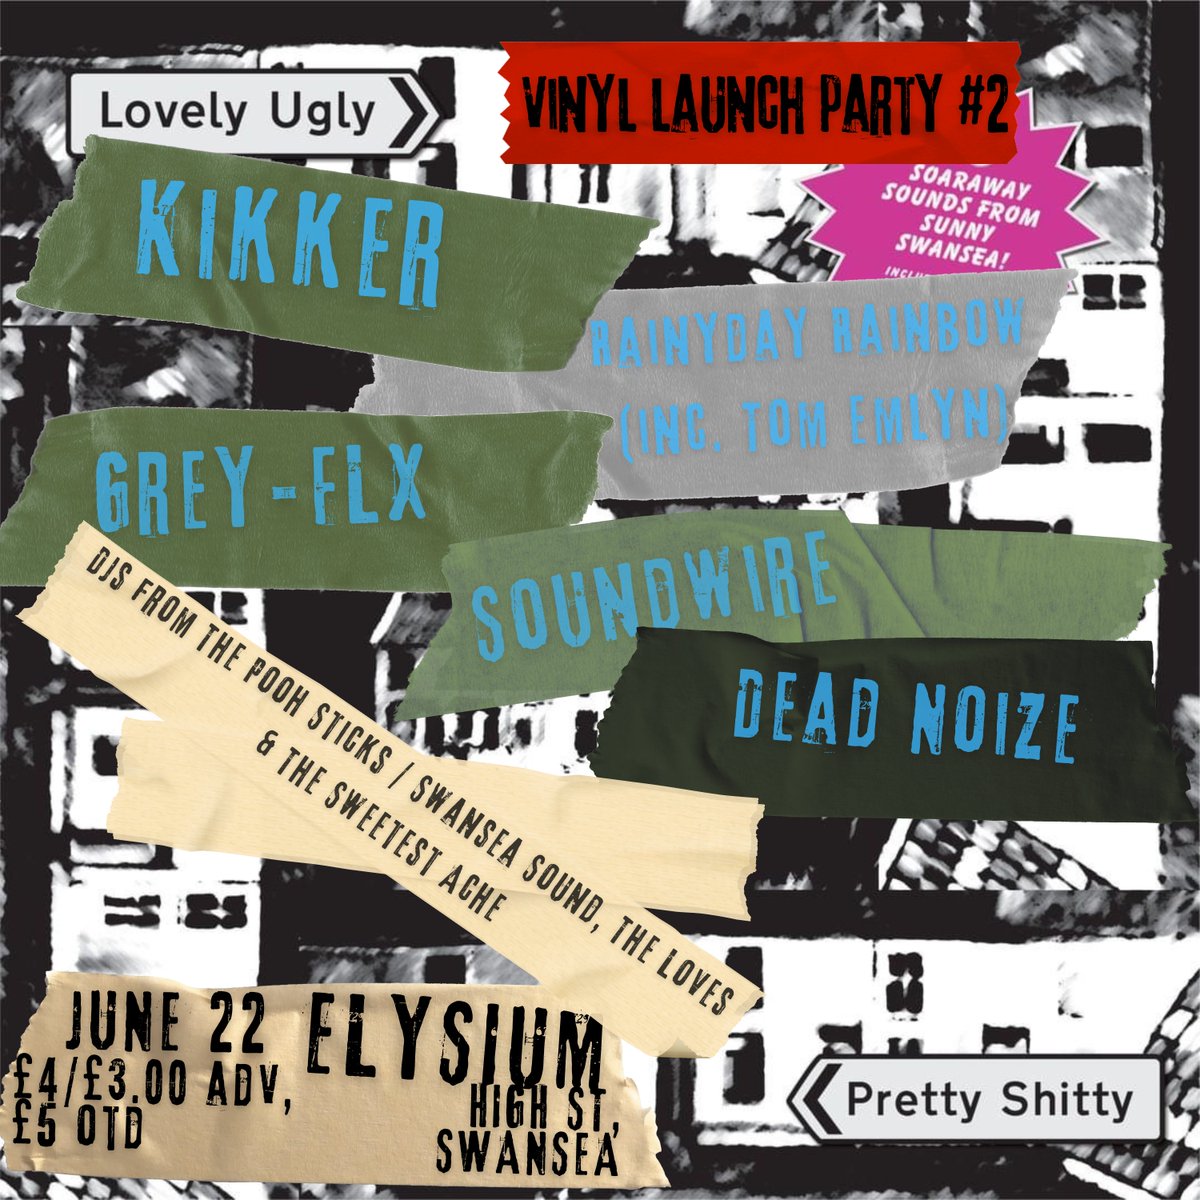 Limited combined tickets for both 'Lovely Ugly' launches at @tangledparrot & @elysiumgallery are available for £7 at link. Catch @Sienco @baby_schillaci @FlxGrey @onlyrainyrainbo @Pete_Soundwire @tom_emlyn @kikkersuck @monetbanduk & Dead Noize. Bargain! wegottickets.com/event/616655